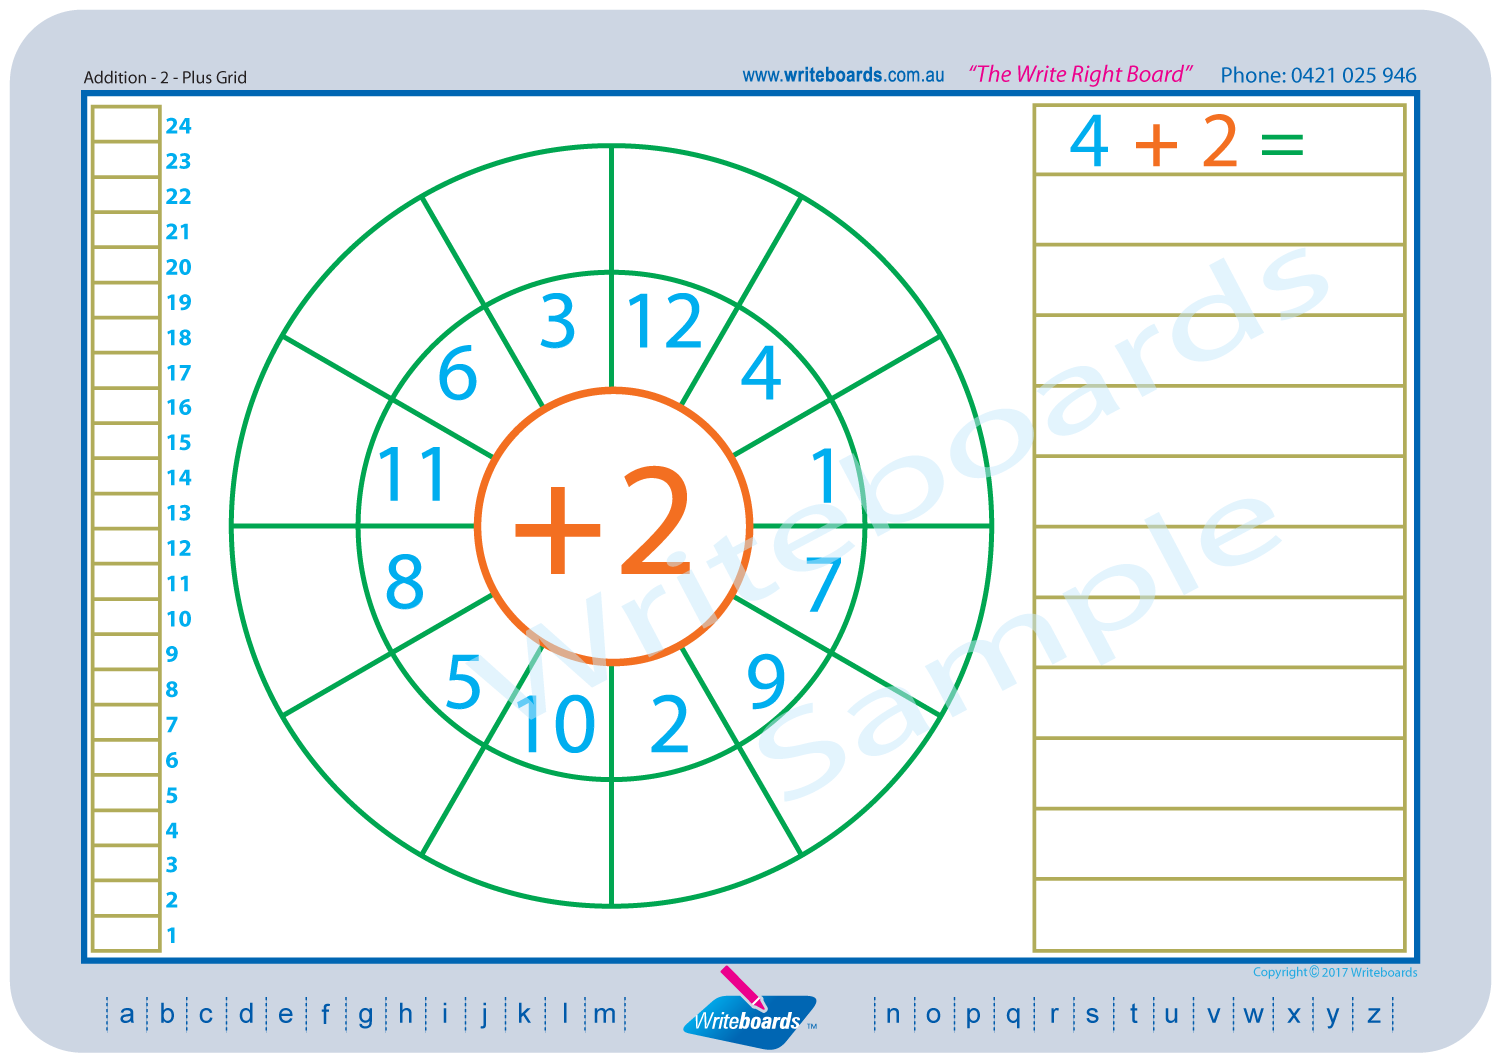 addition-template-grid-to-align-numbers-freebie-powerpoint-slide-designs-grid-toddler